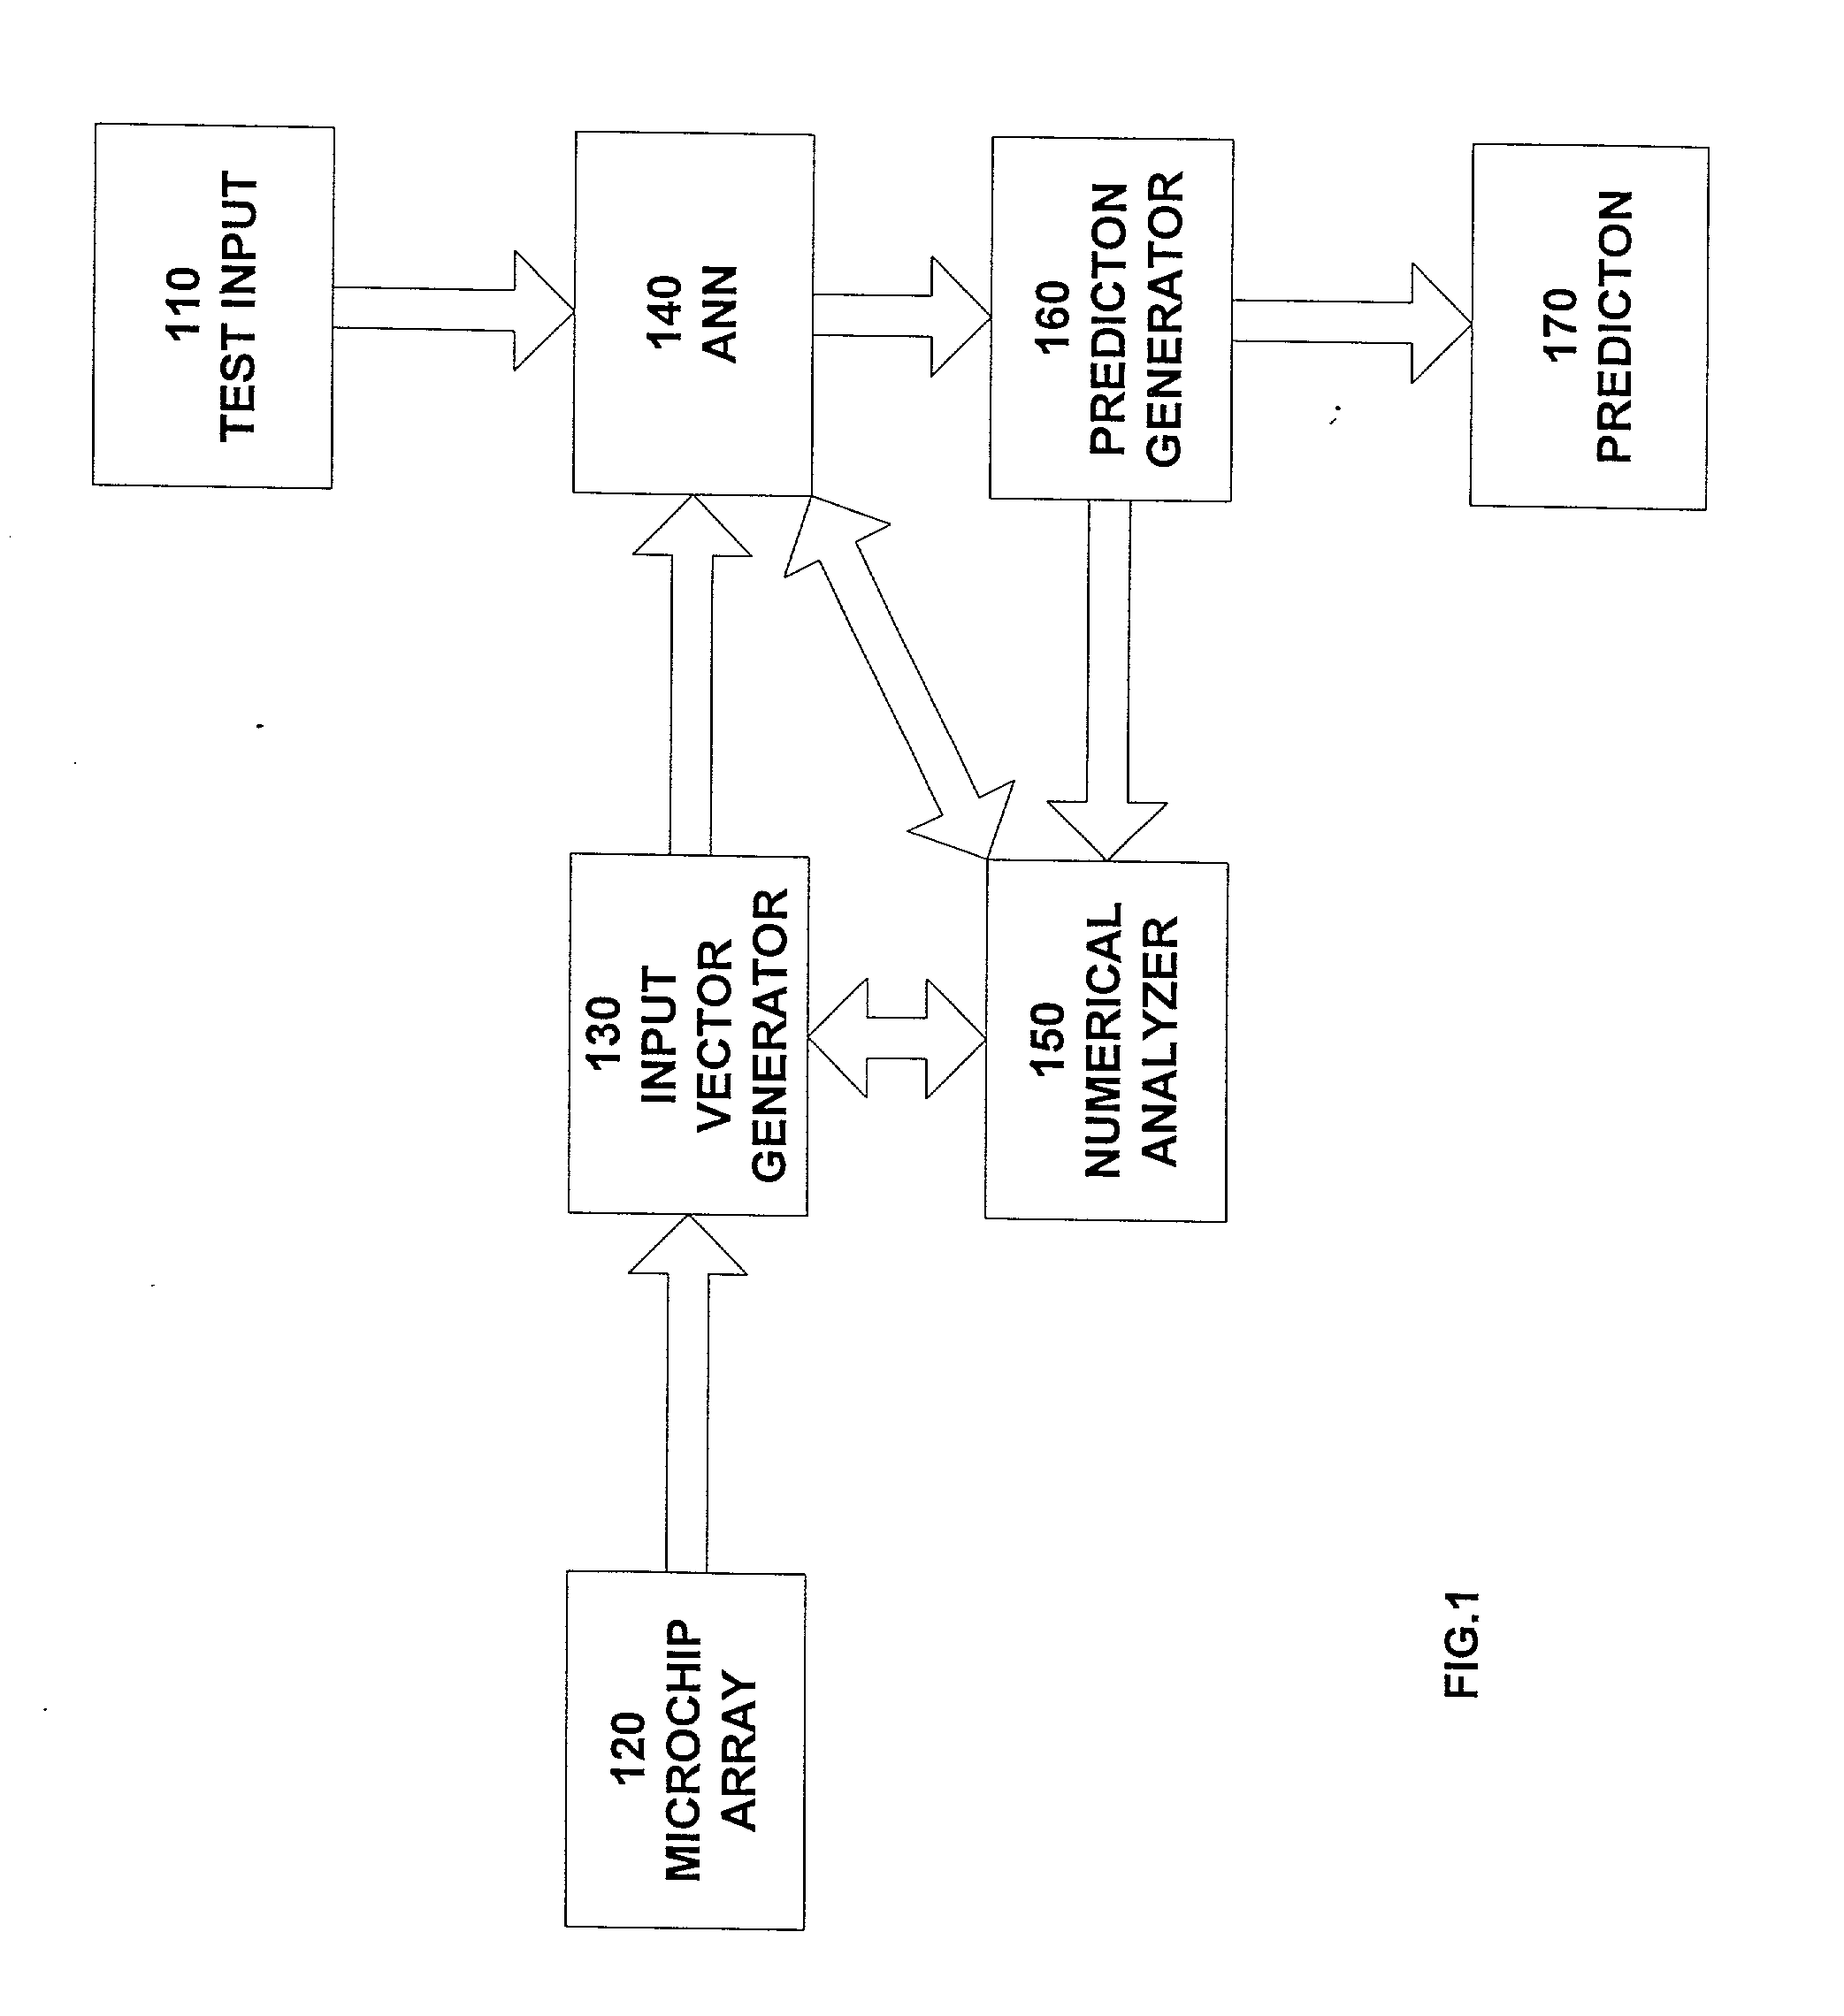 System and method for using neural nets for analyzing micro-arrays